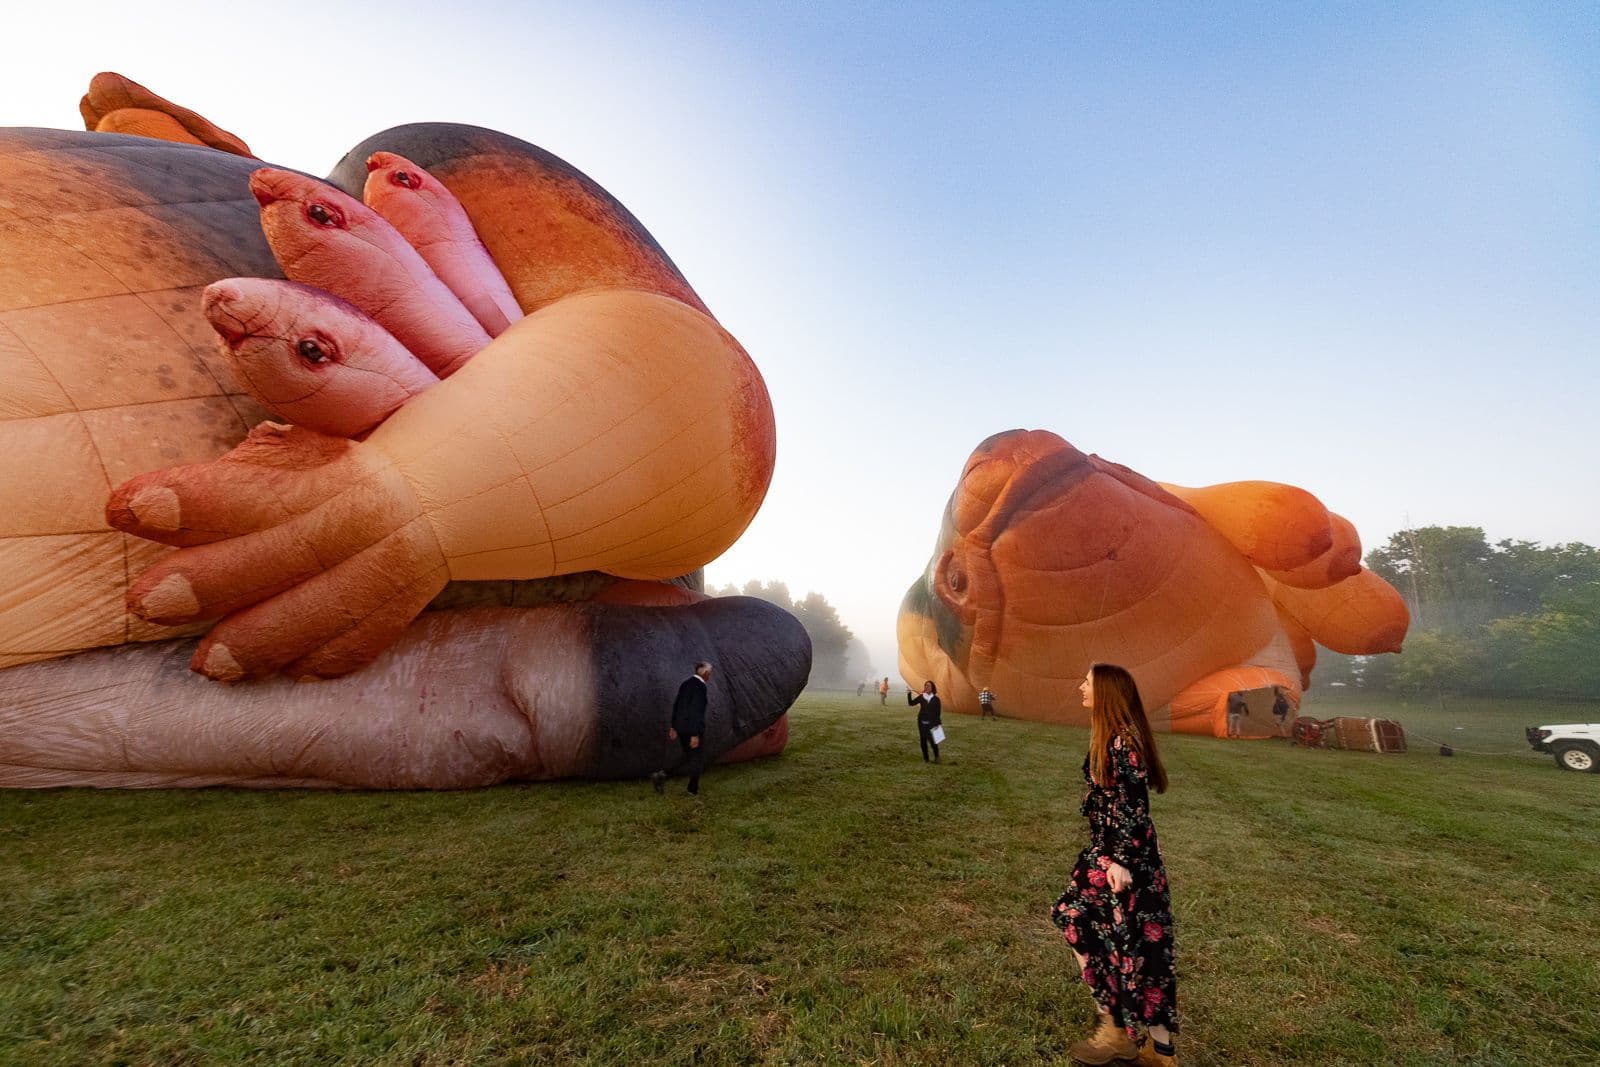 A photograph of a woman standing in a field watching a hot-air balloon in the shape of a flying whale being inflated.